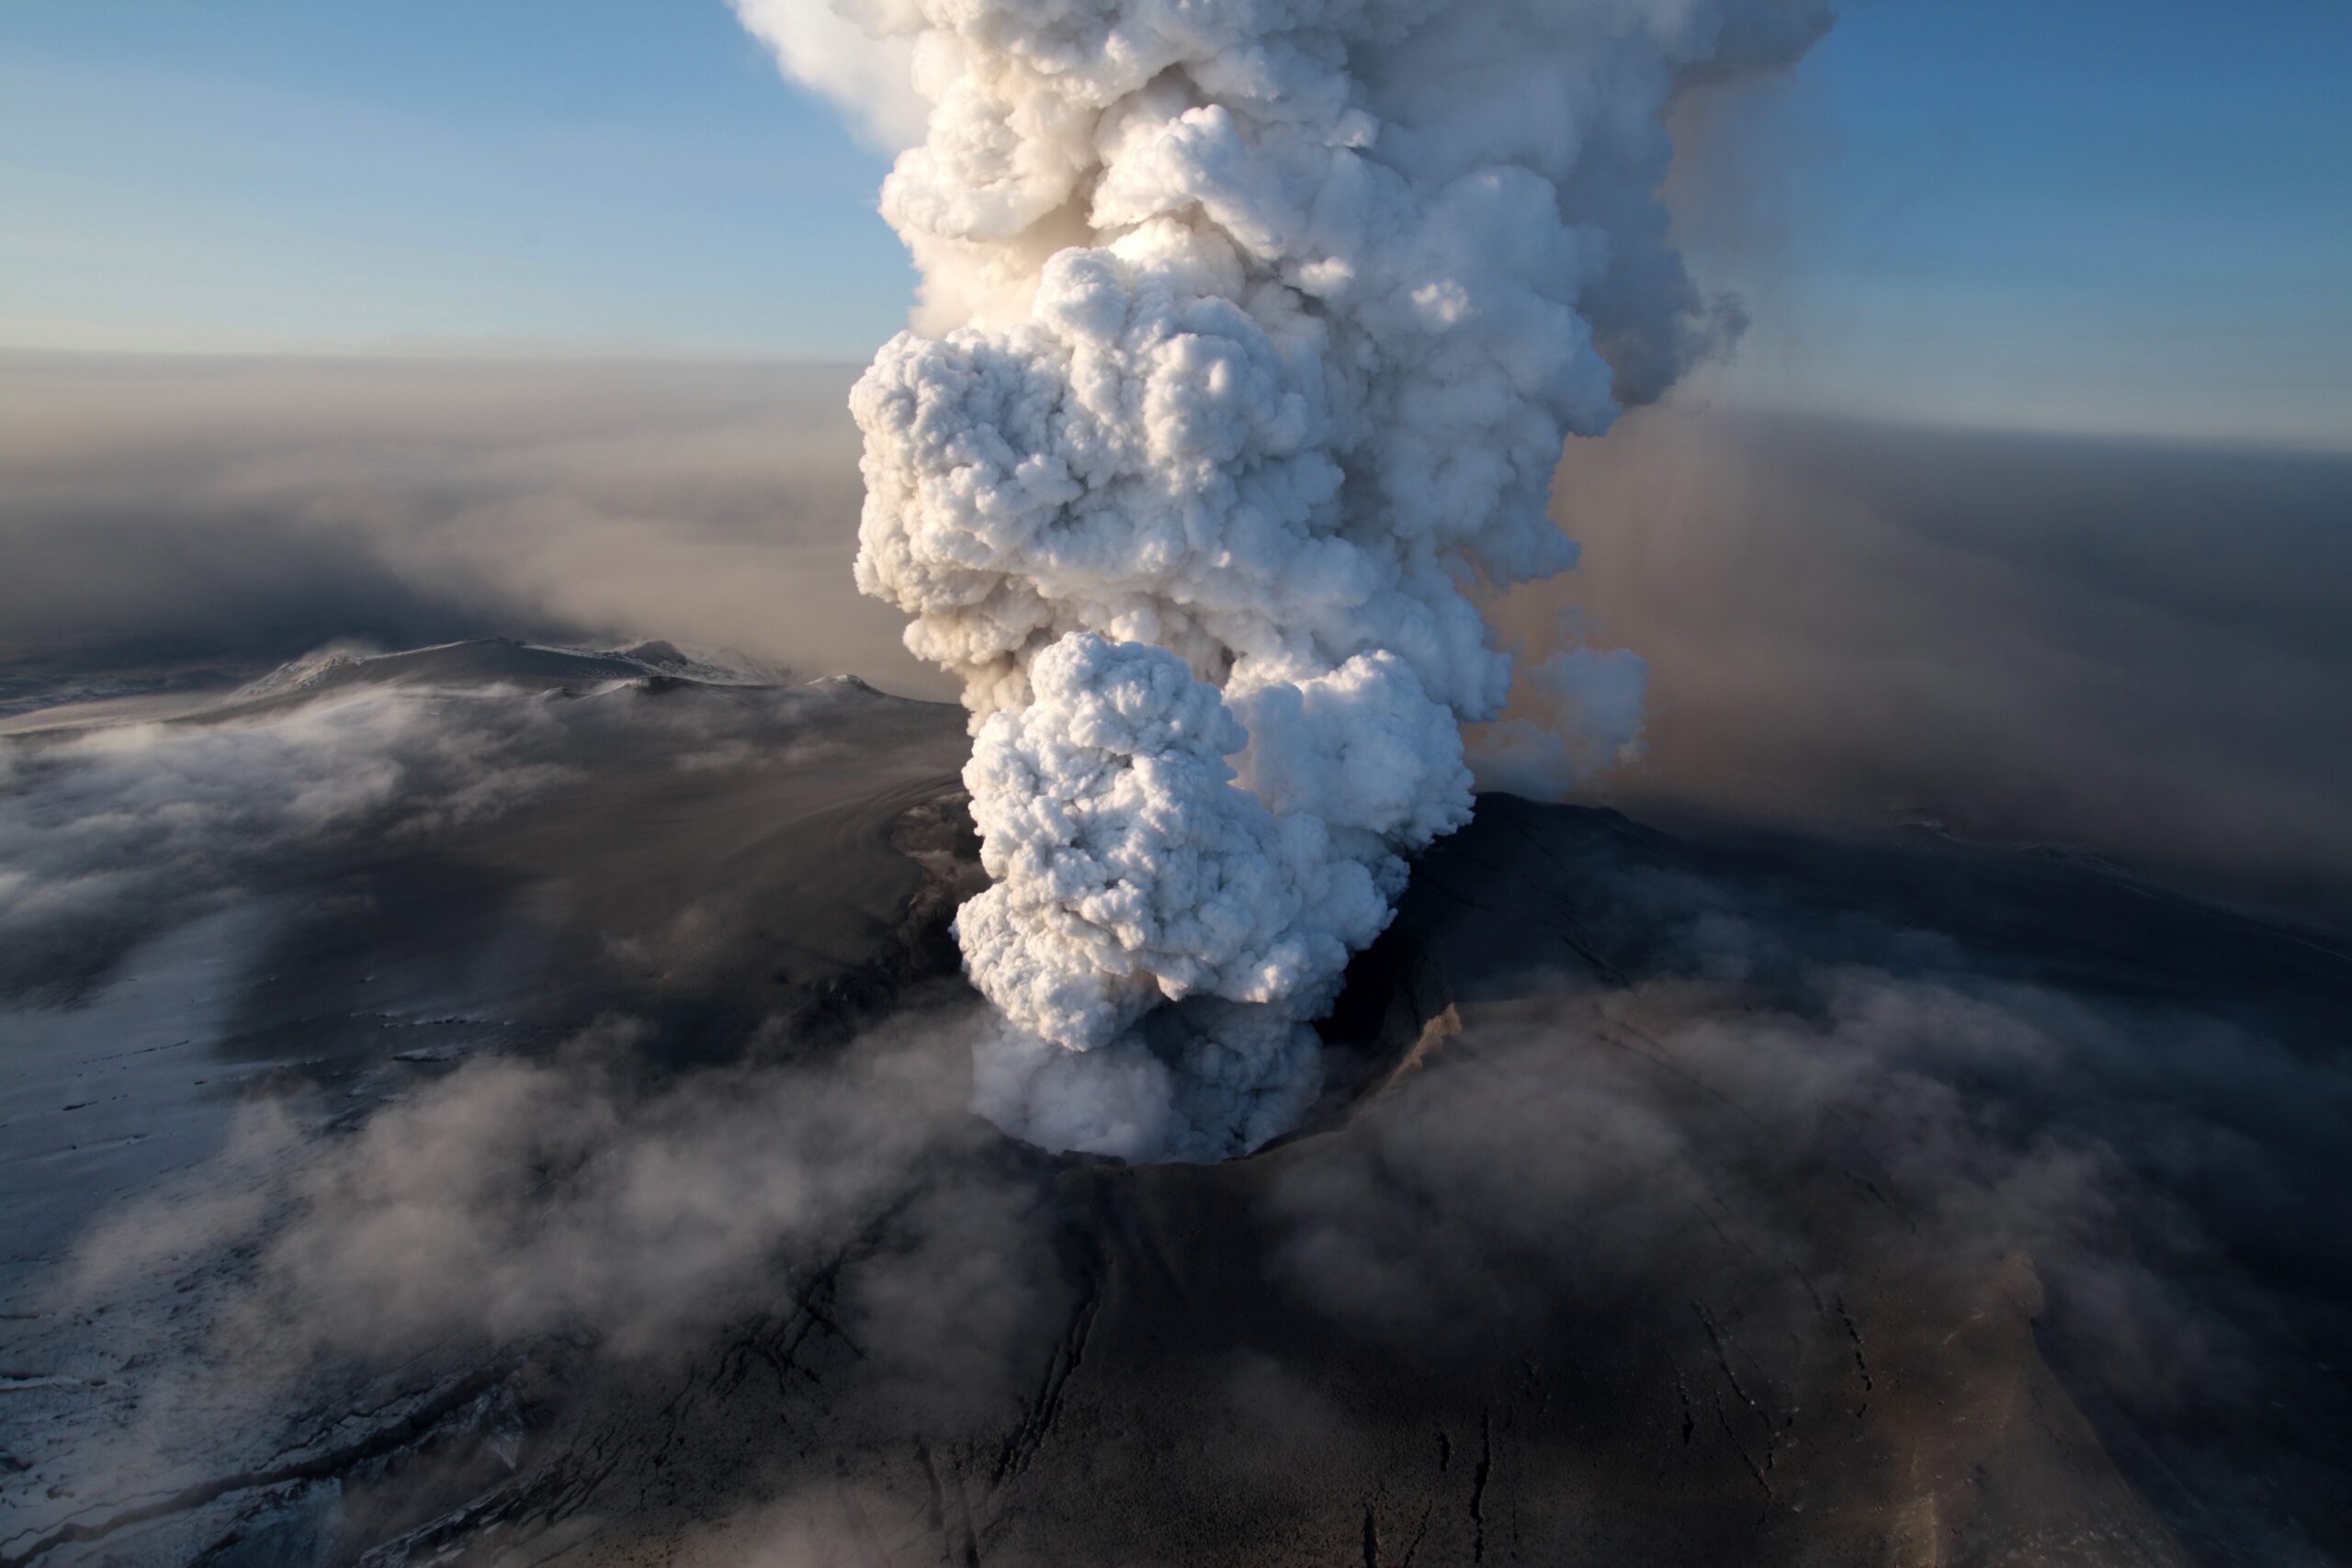 A volcano is erupting again in Iceland. Is climate change causing more